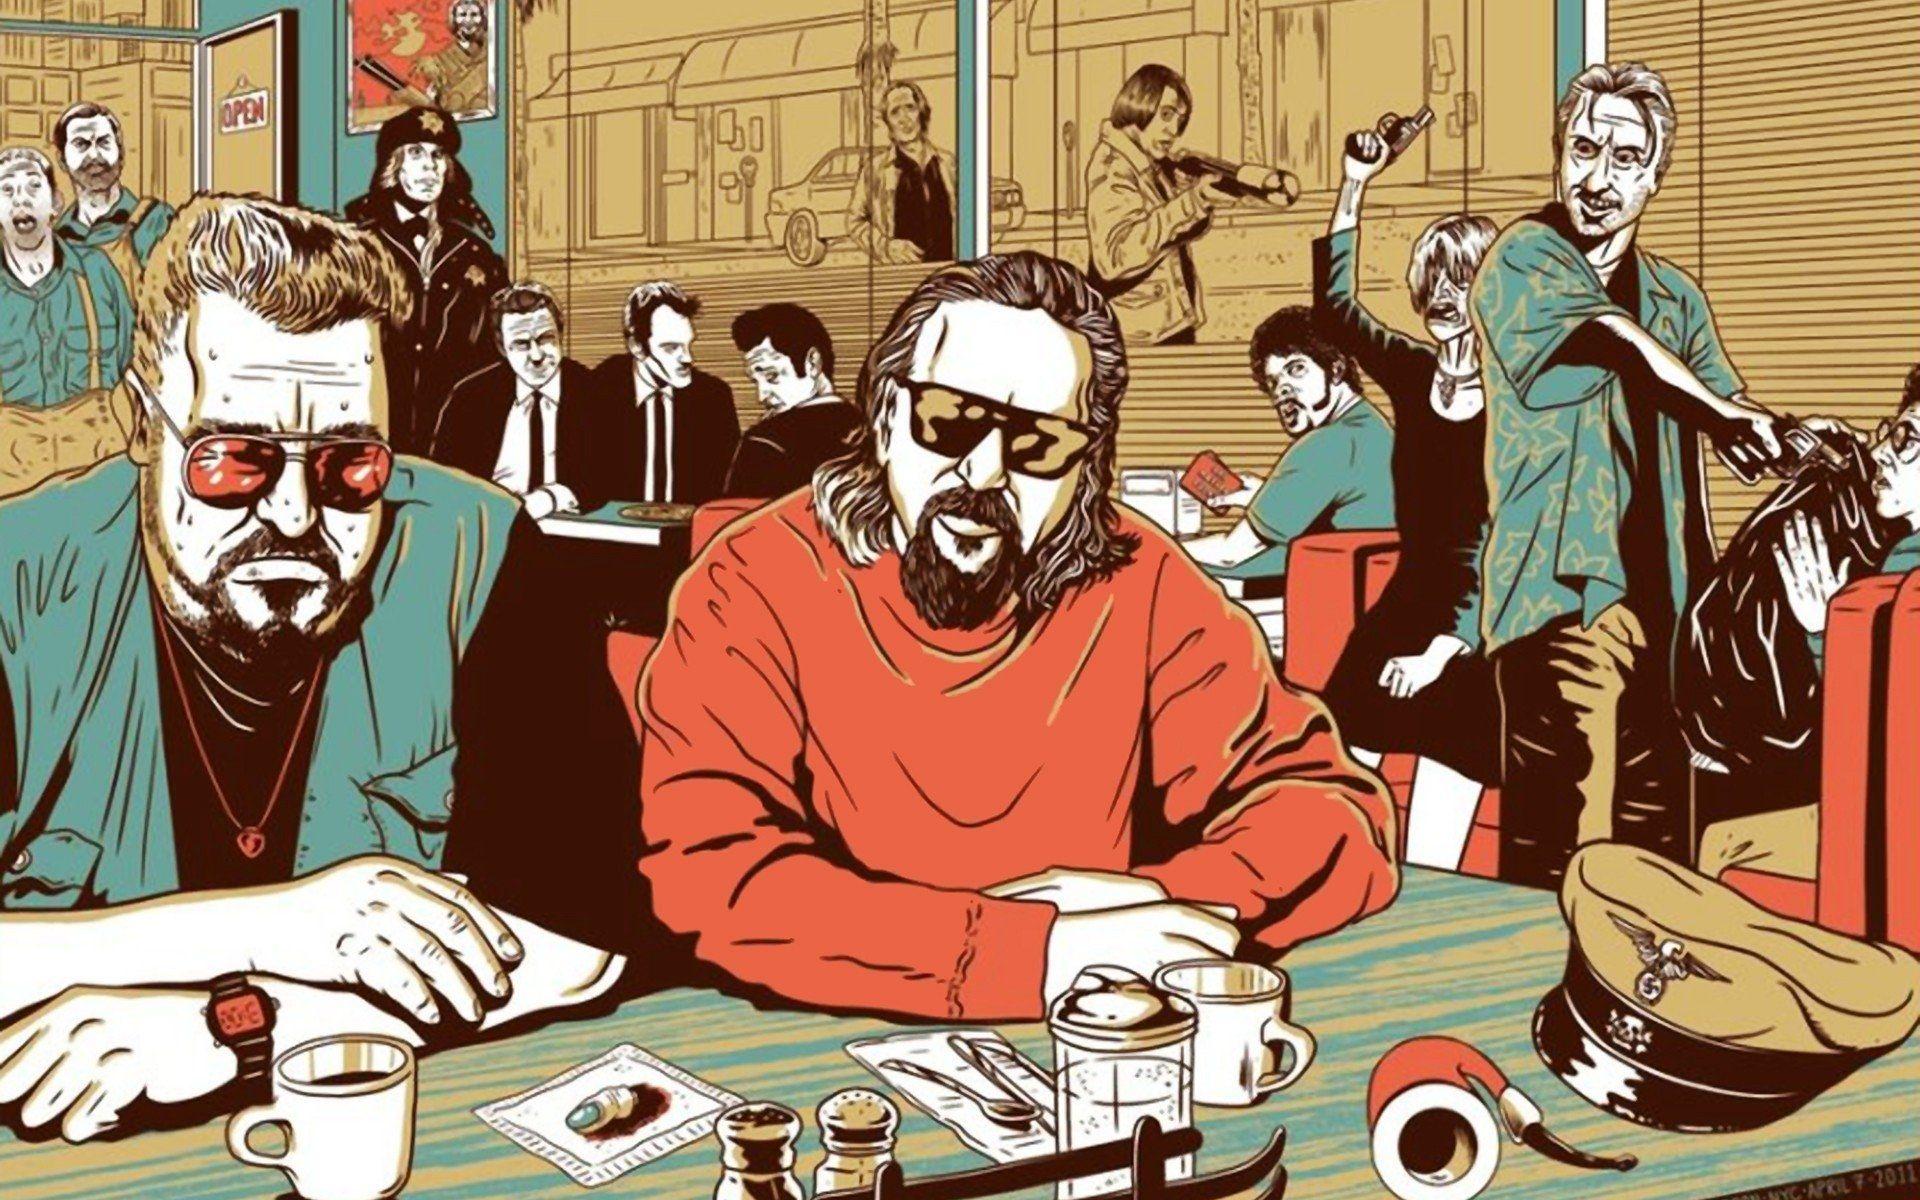 The Big Lebowski HD Wallpaper and Background Image